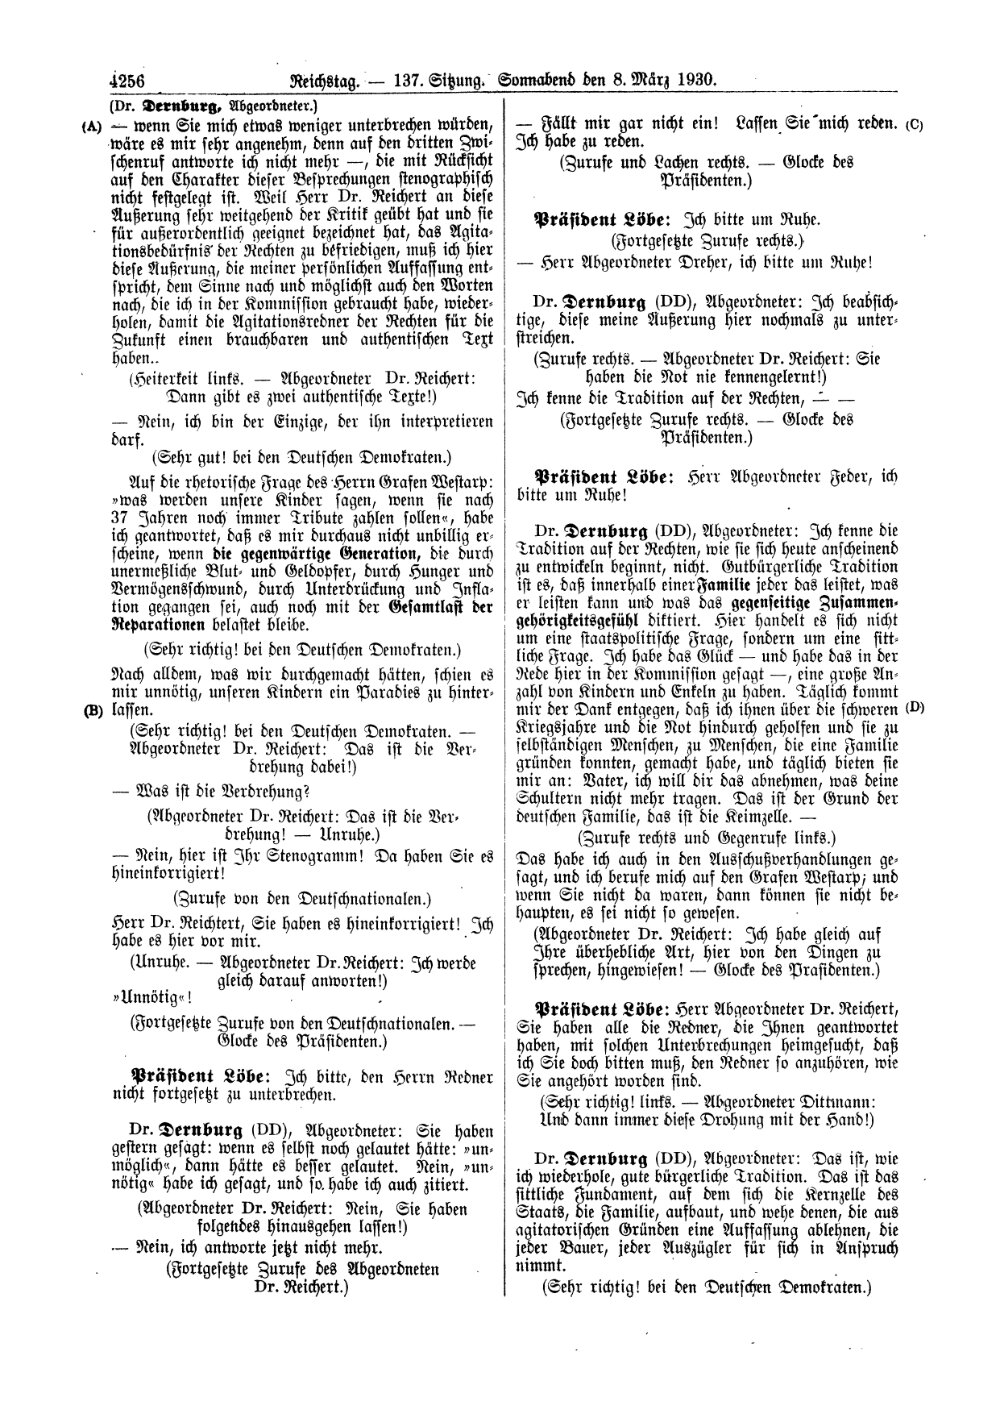 Scan of page 4256